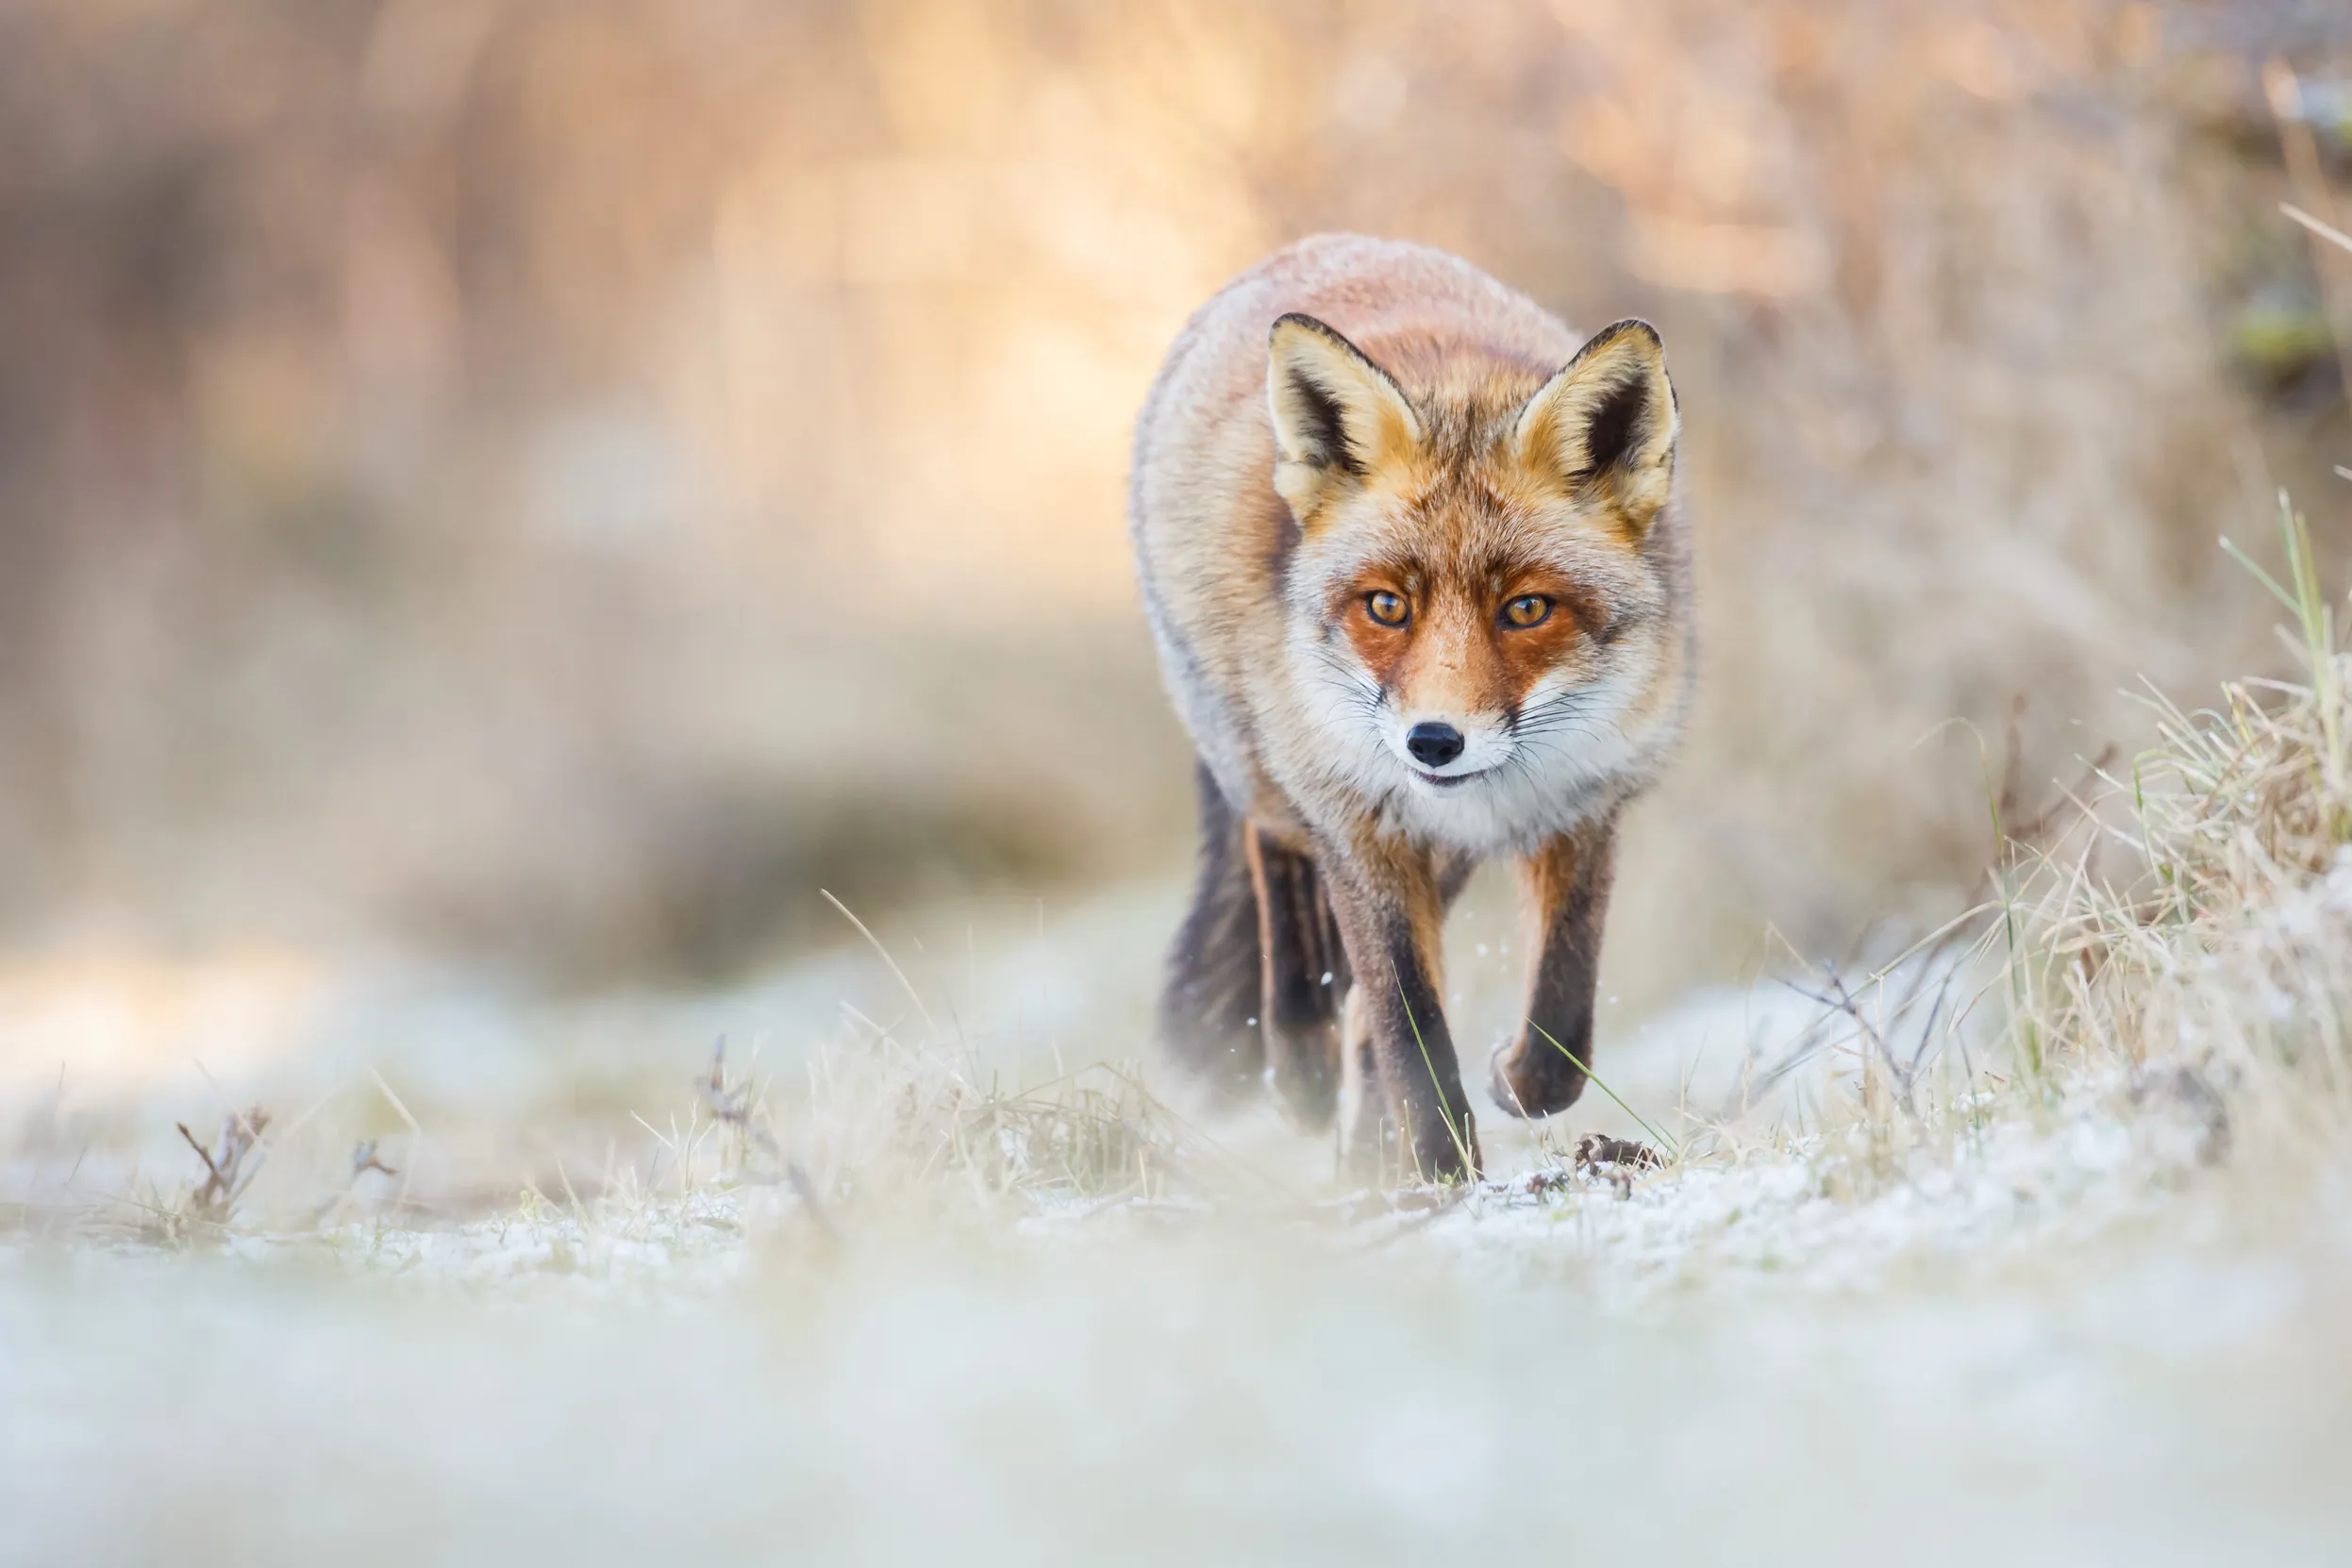 A lone red fox walking along a snow and frost covered grassy path.